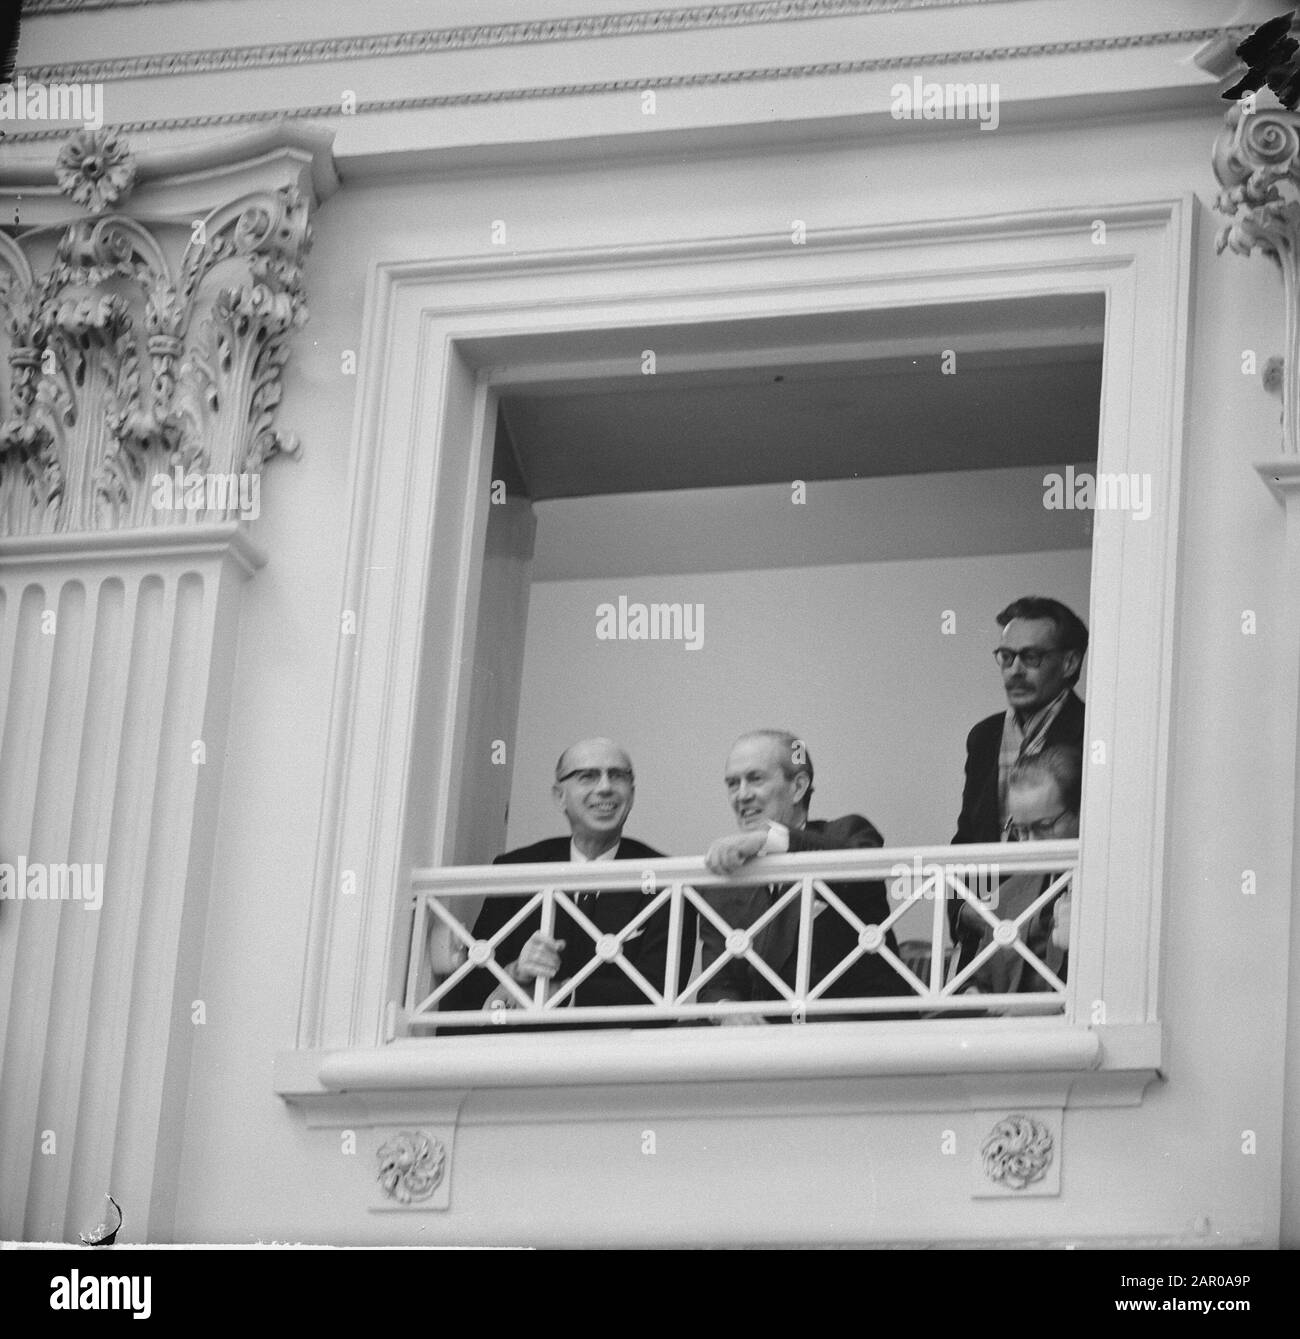 Minister Luns during his speech in the House of Representatives, foreign interest in Lower House, left Mr. Cidor (Israel) and right Dr. Winterstein (Austria) Date: 31 January 1963 Location: Den Haag, Zuid-Holland Keywords: redes Personal name: Cidor, Dr. Winterstein, Luns, J.A.M.H., Luns, Joseph Stock Photo